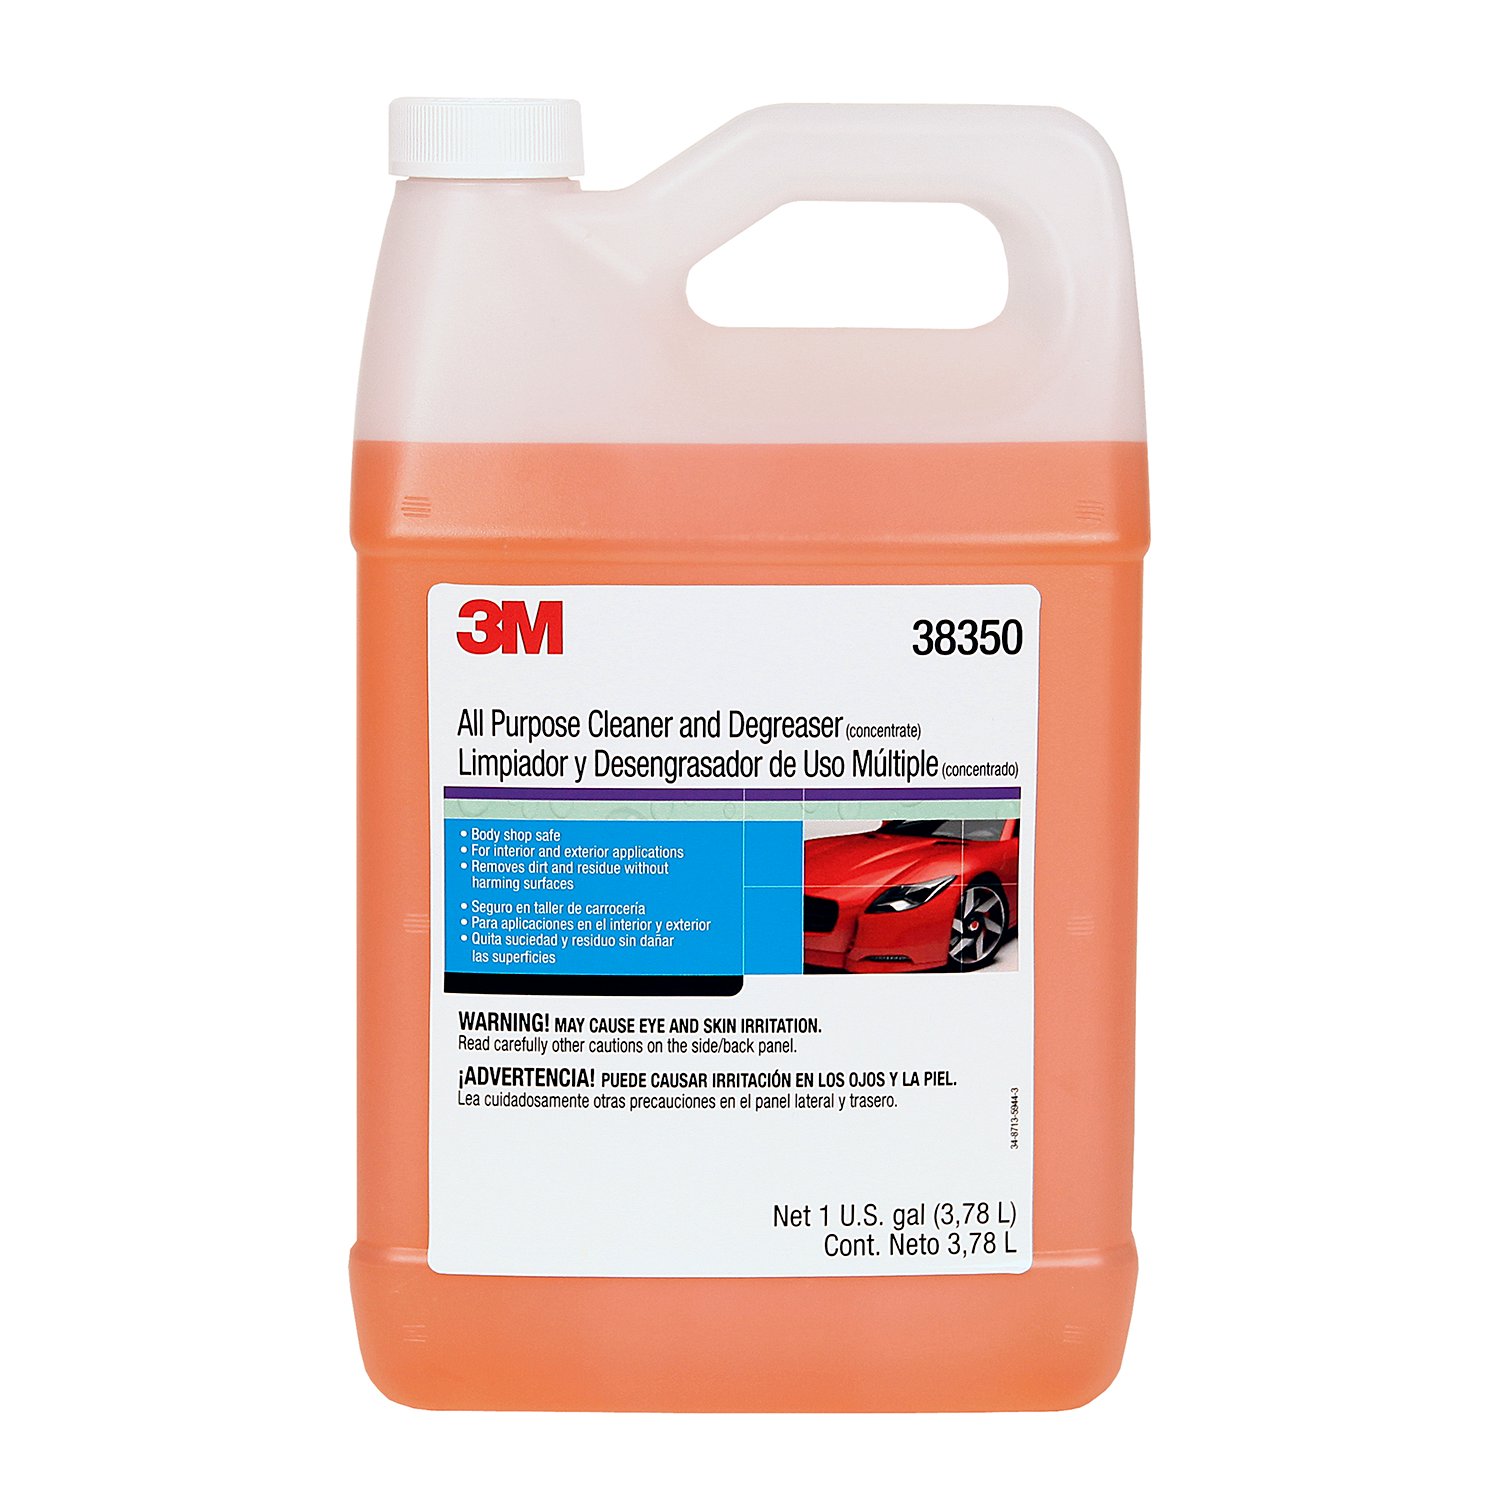 7000000641 - 3M All Purpose Cleaner and Degreaser, 38350, 1 gal, 4 per case